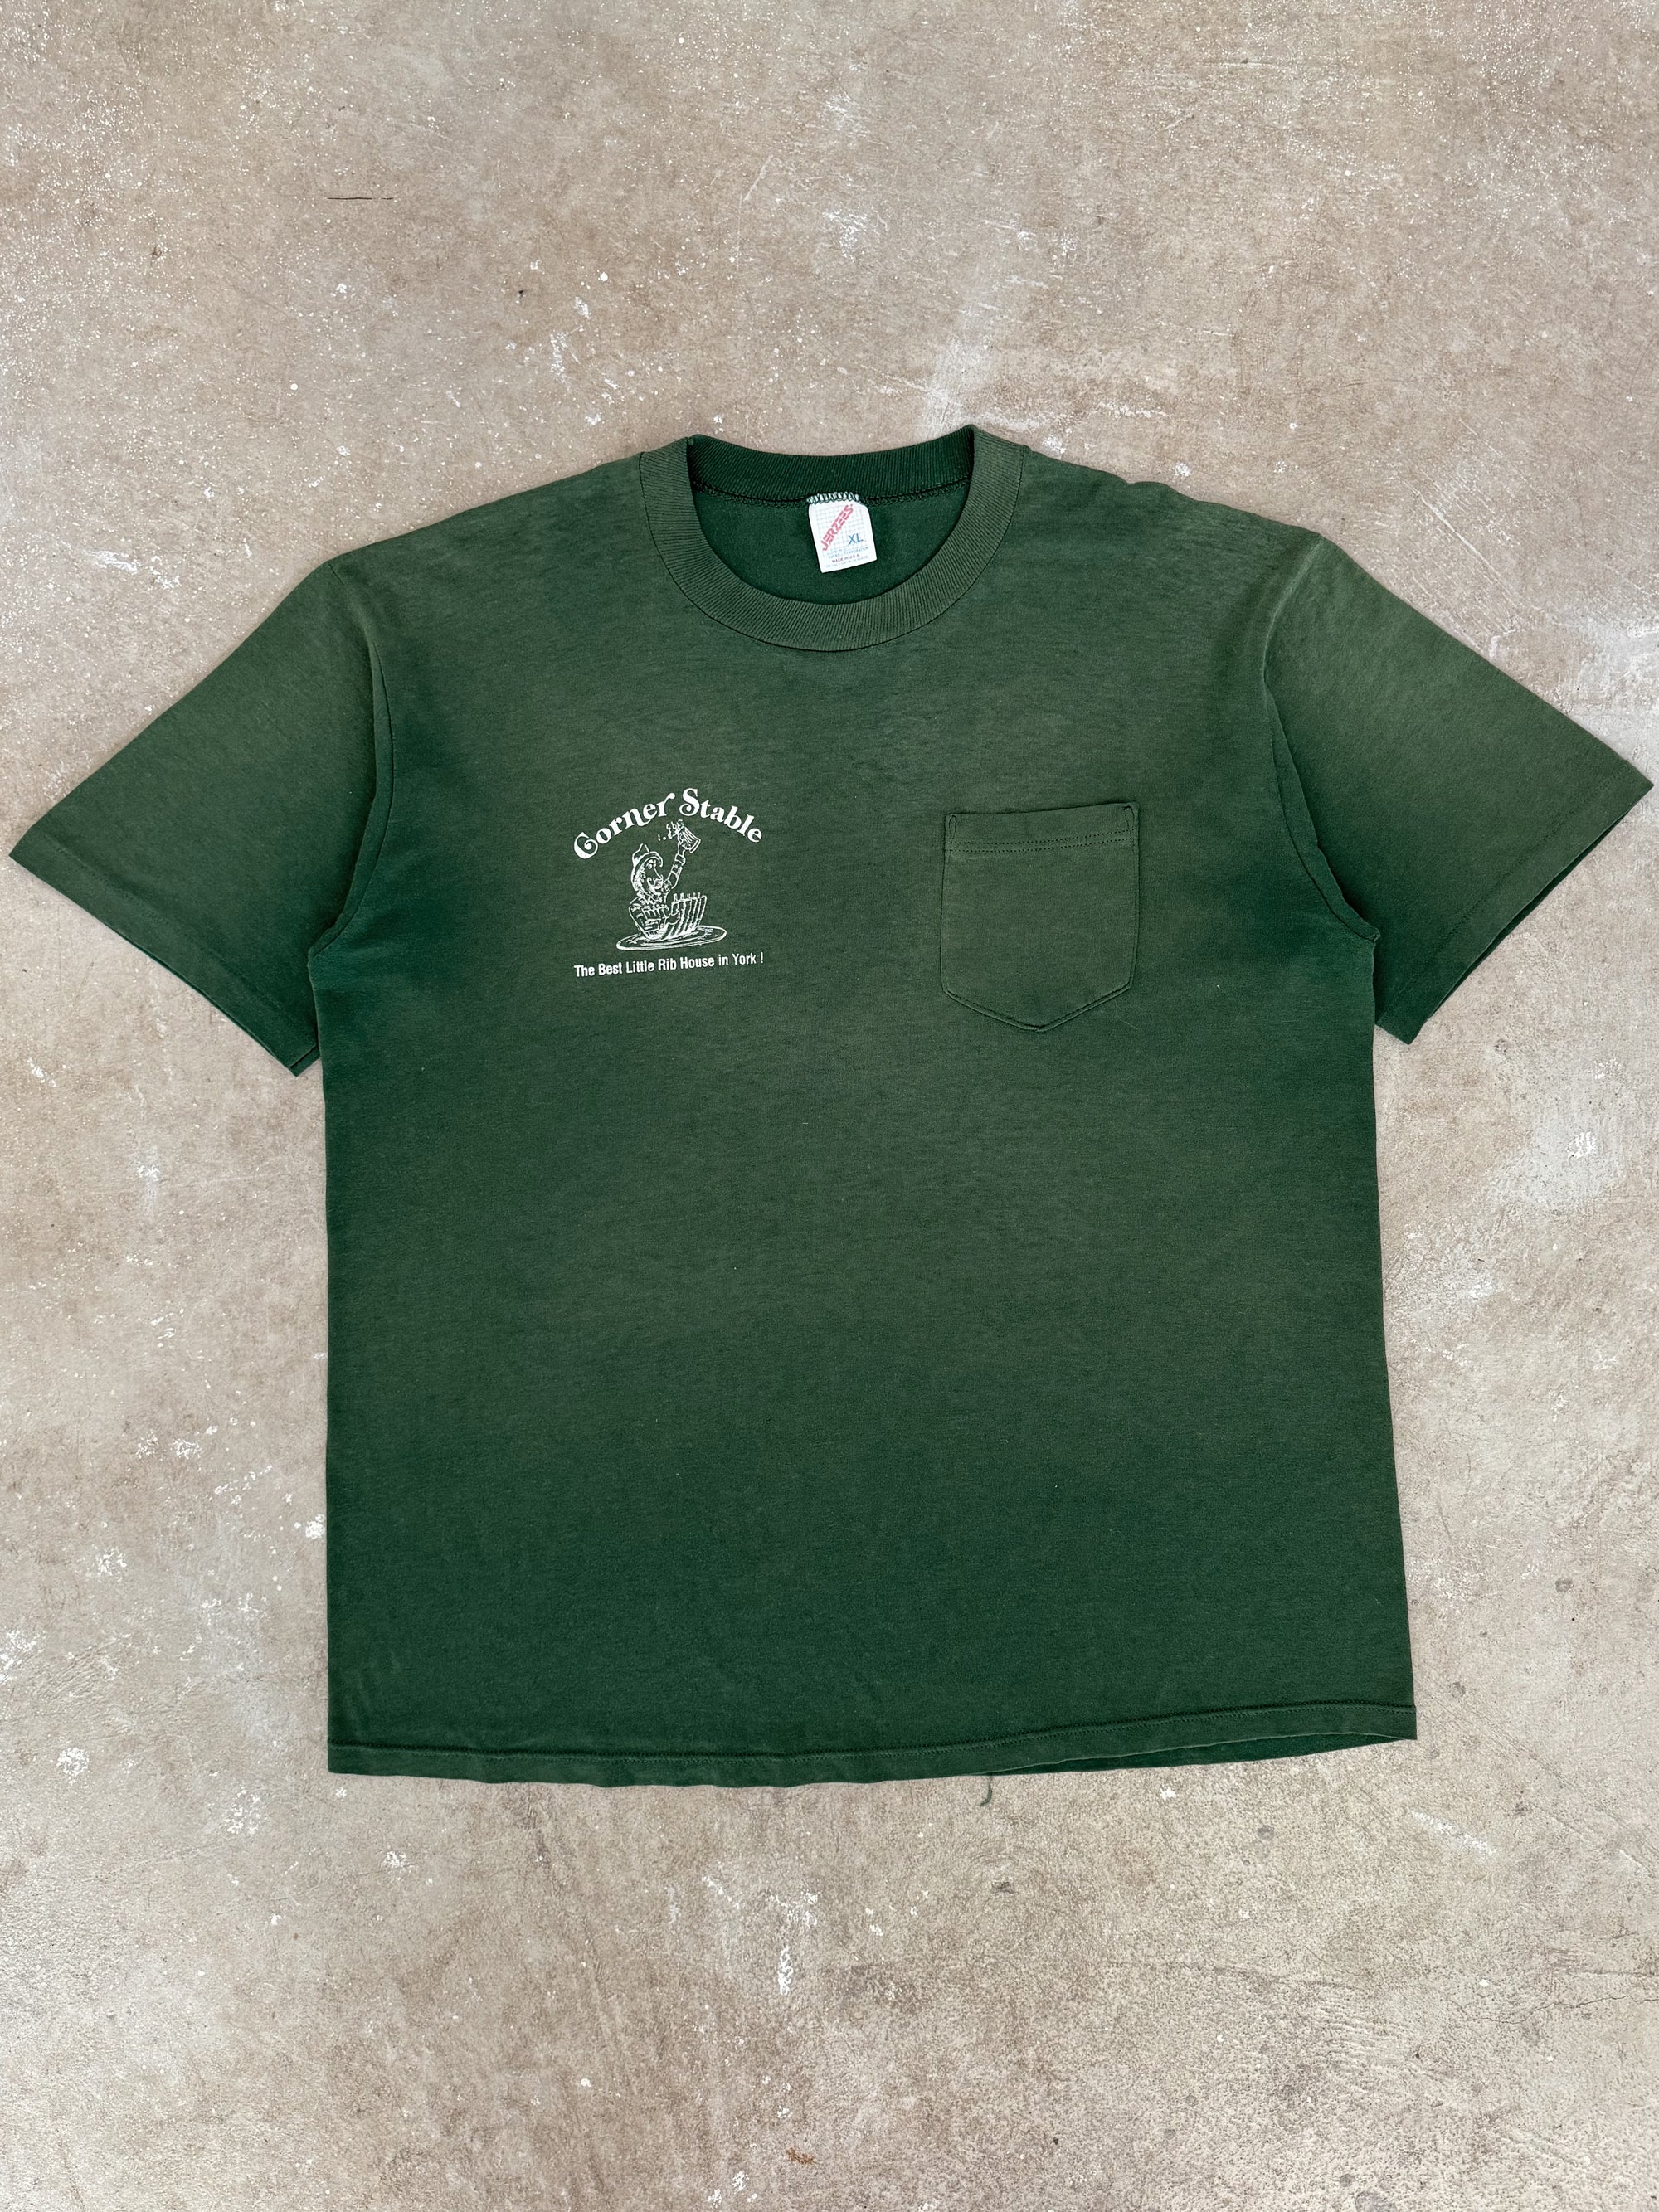 1980s/90s "Corner Stable" Faded Pocket Tee (L/XL)